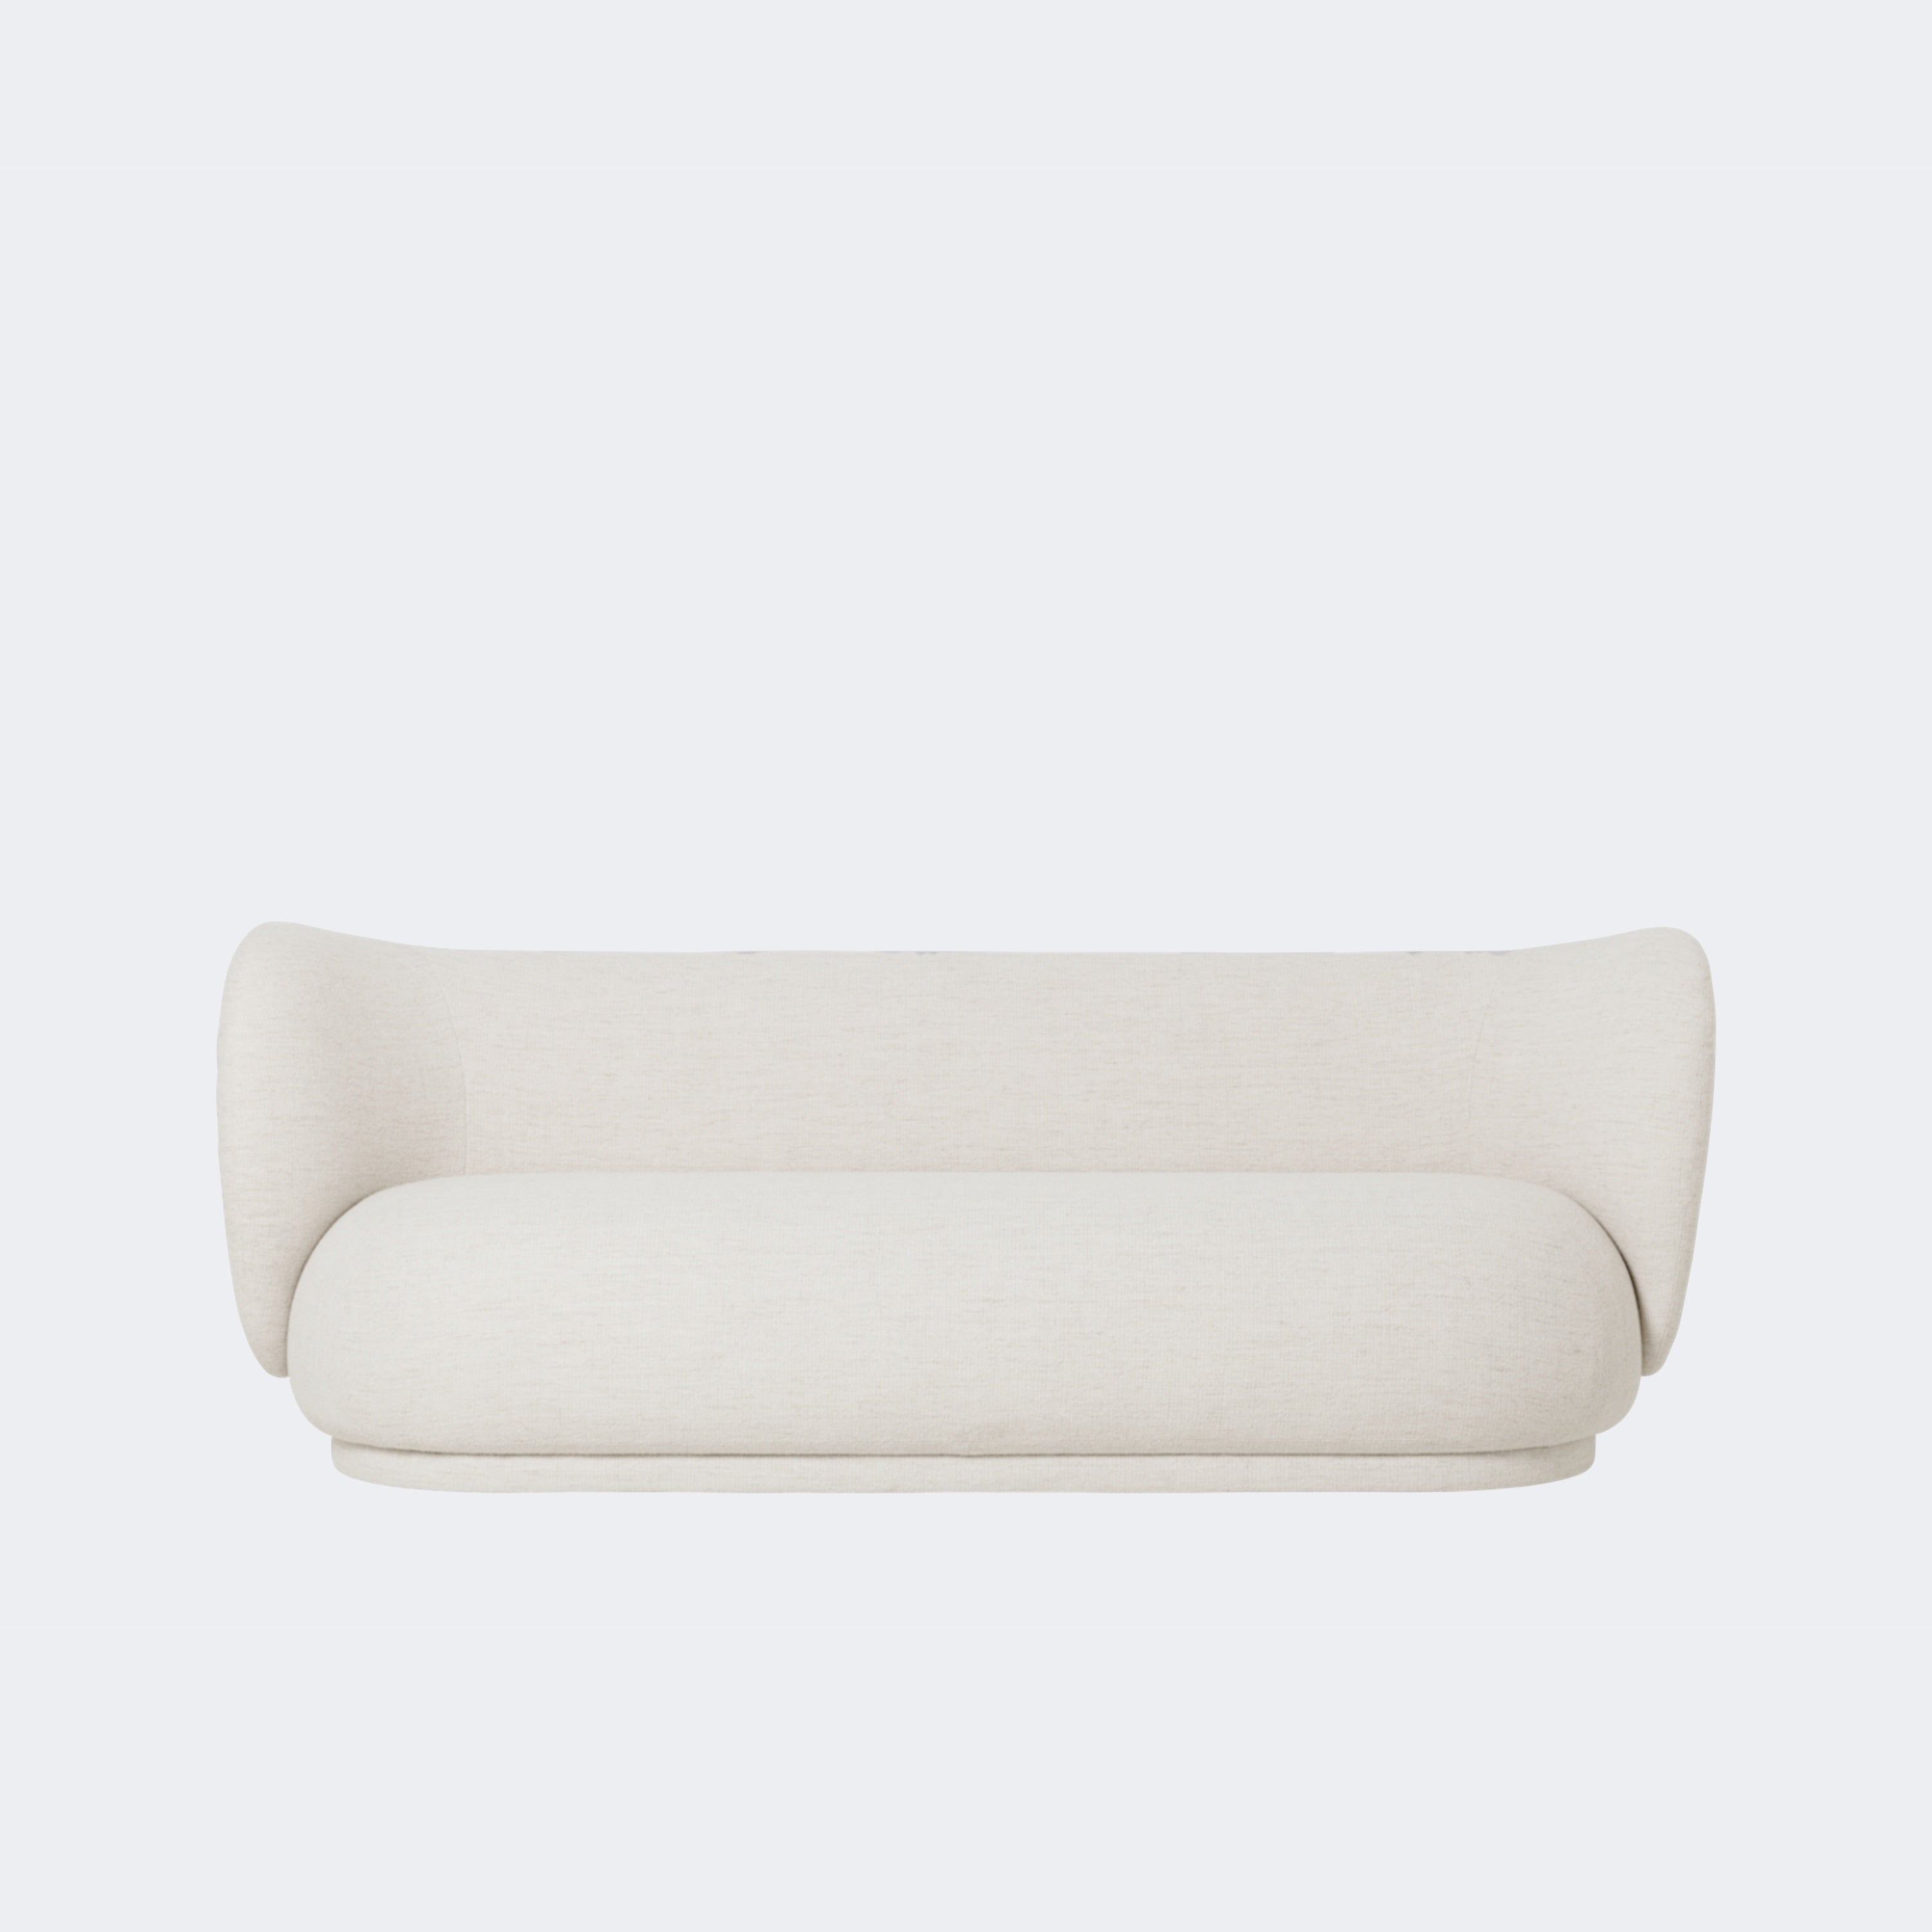 Ferm Living Rico Sofa, 3 Seater Ready To Ship Boucle - Off-White - KANSO#Fabric_Boucle - Off-White